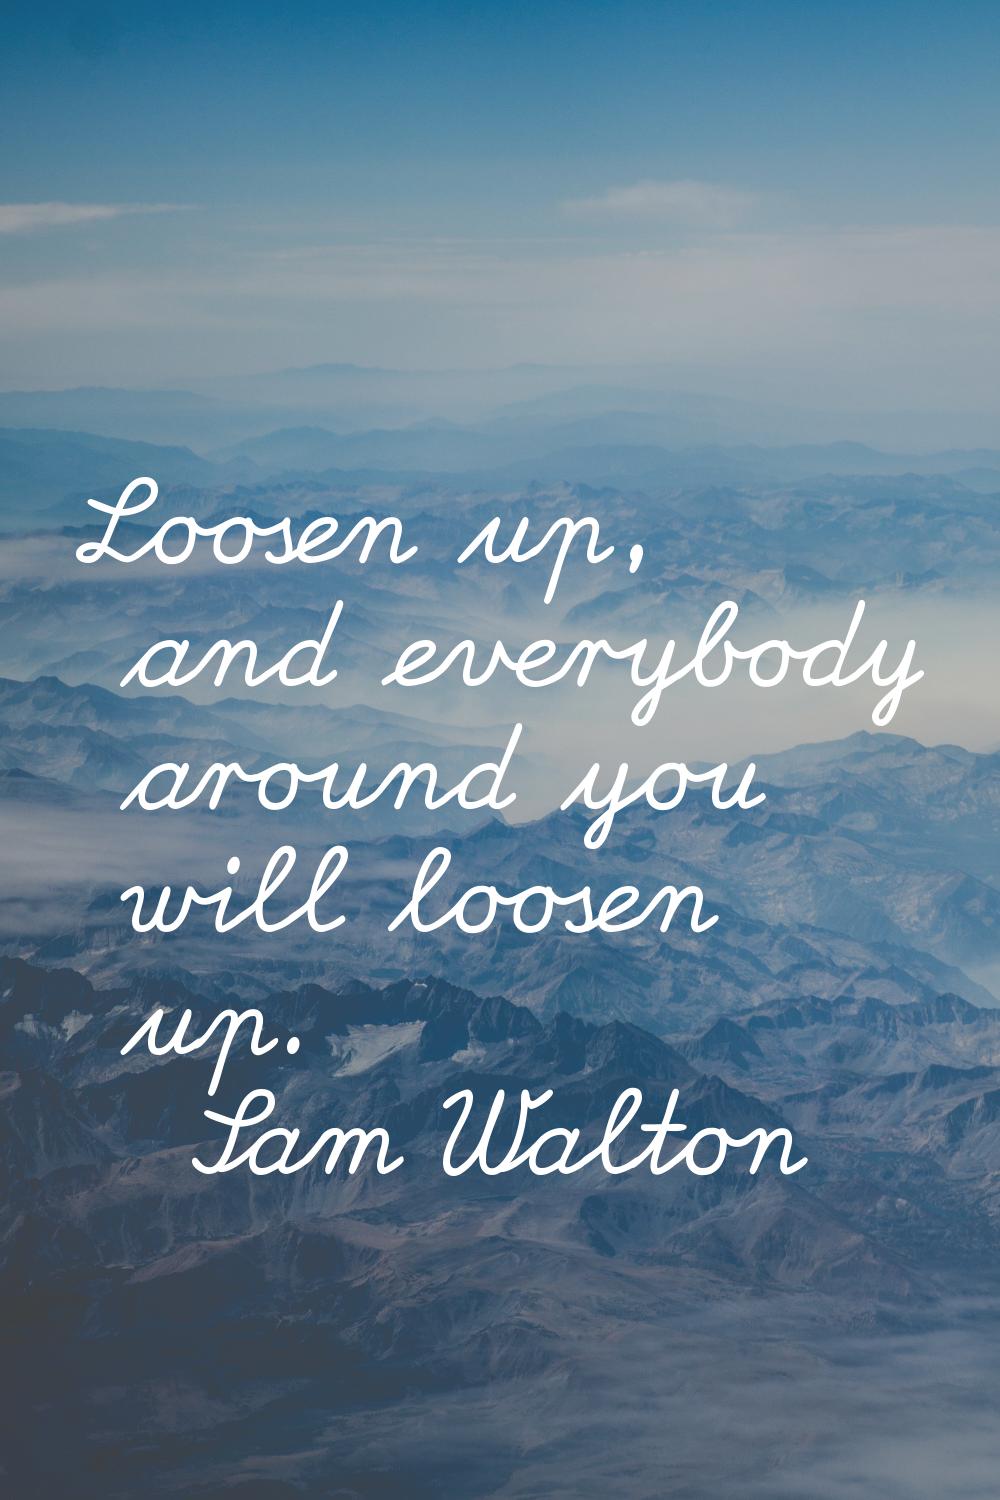 Loosen up, and everybody around you will loosen up.